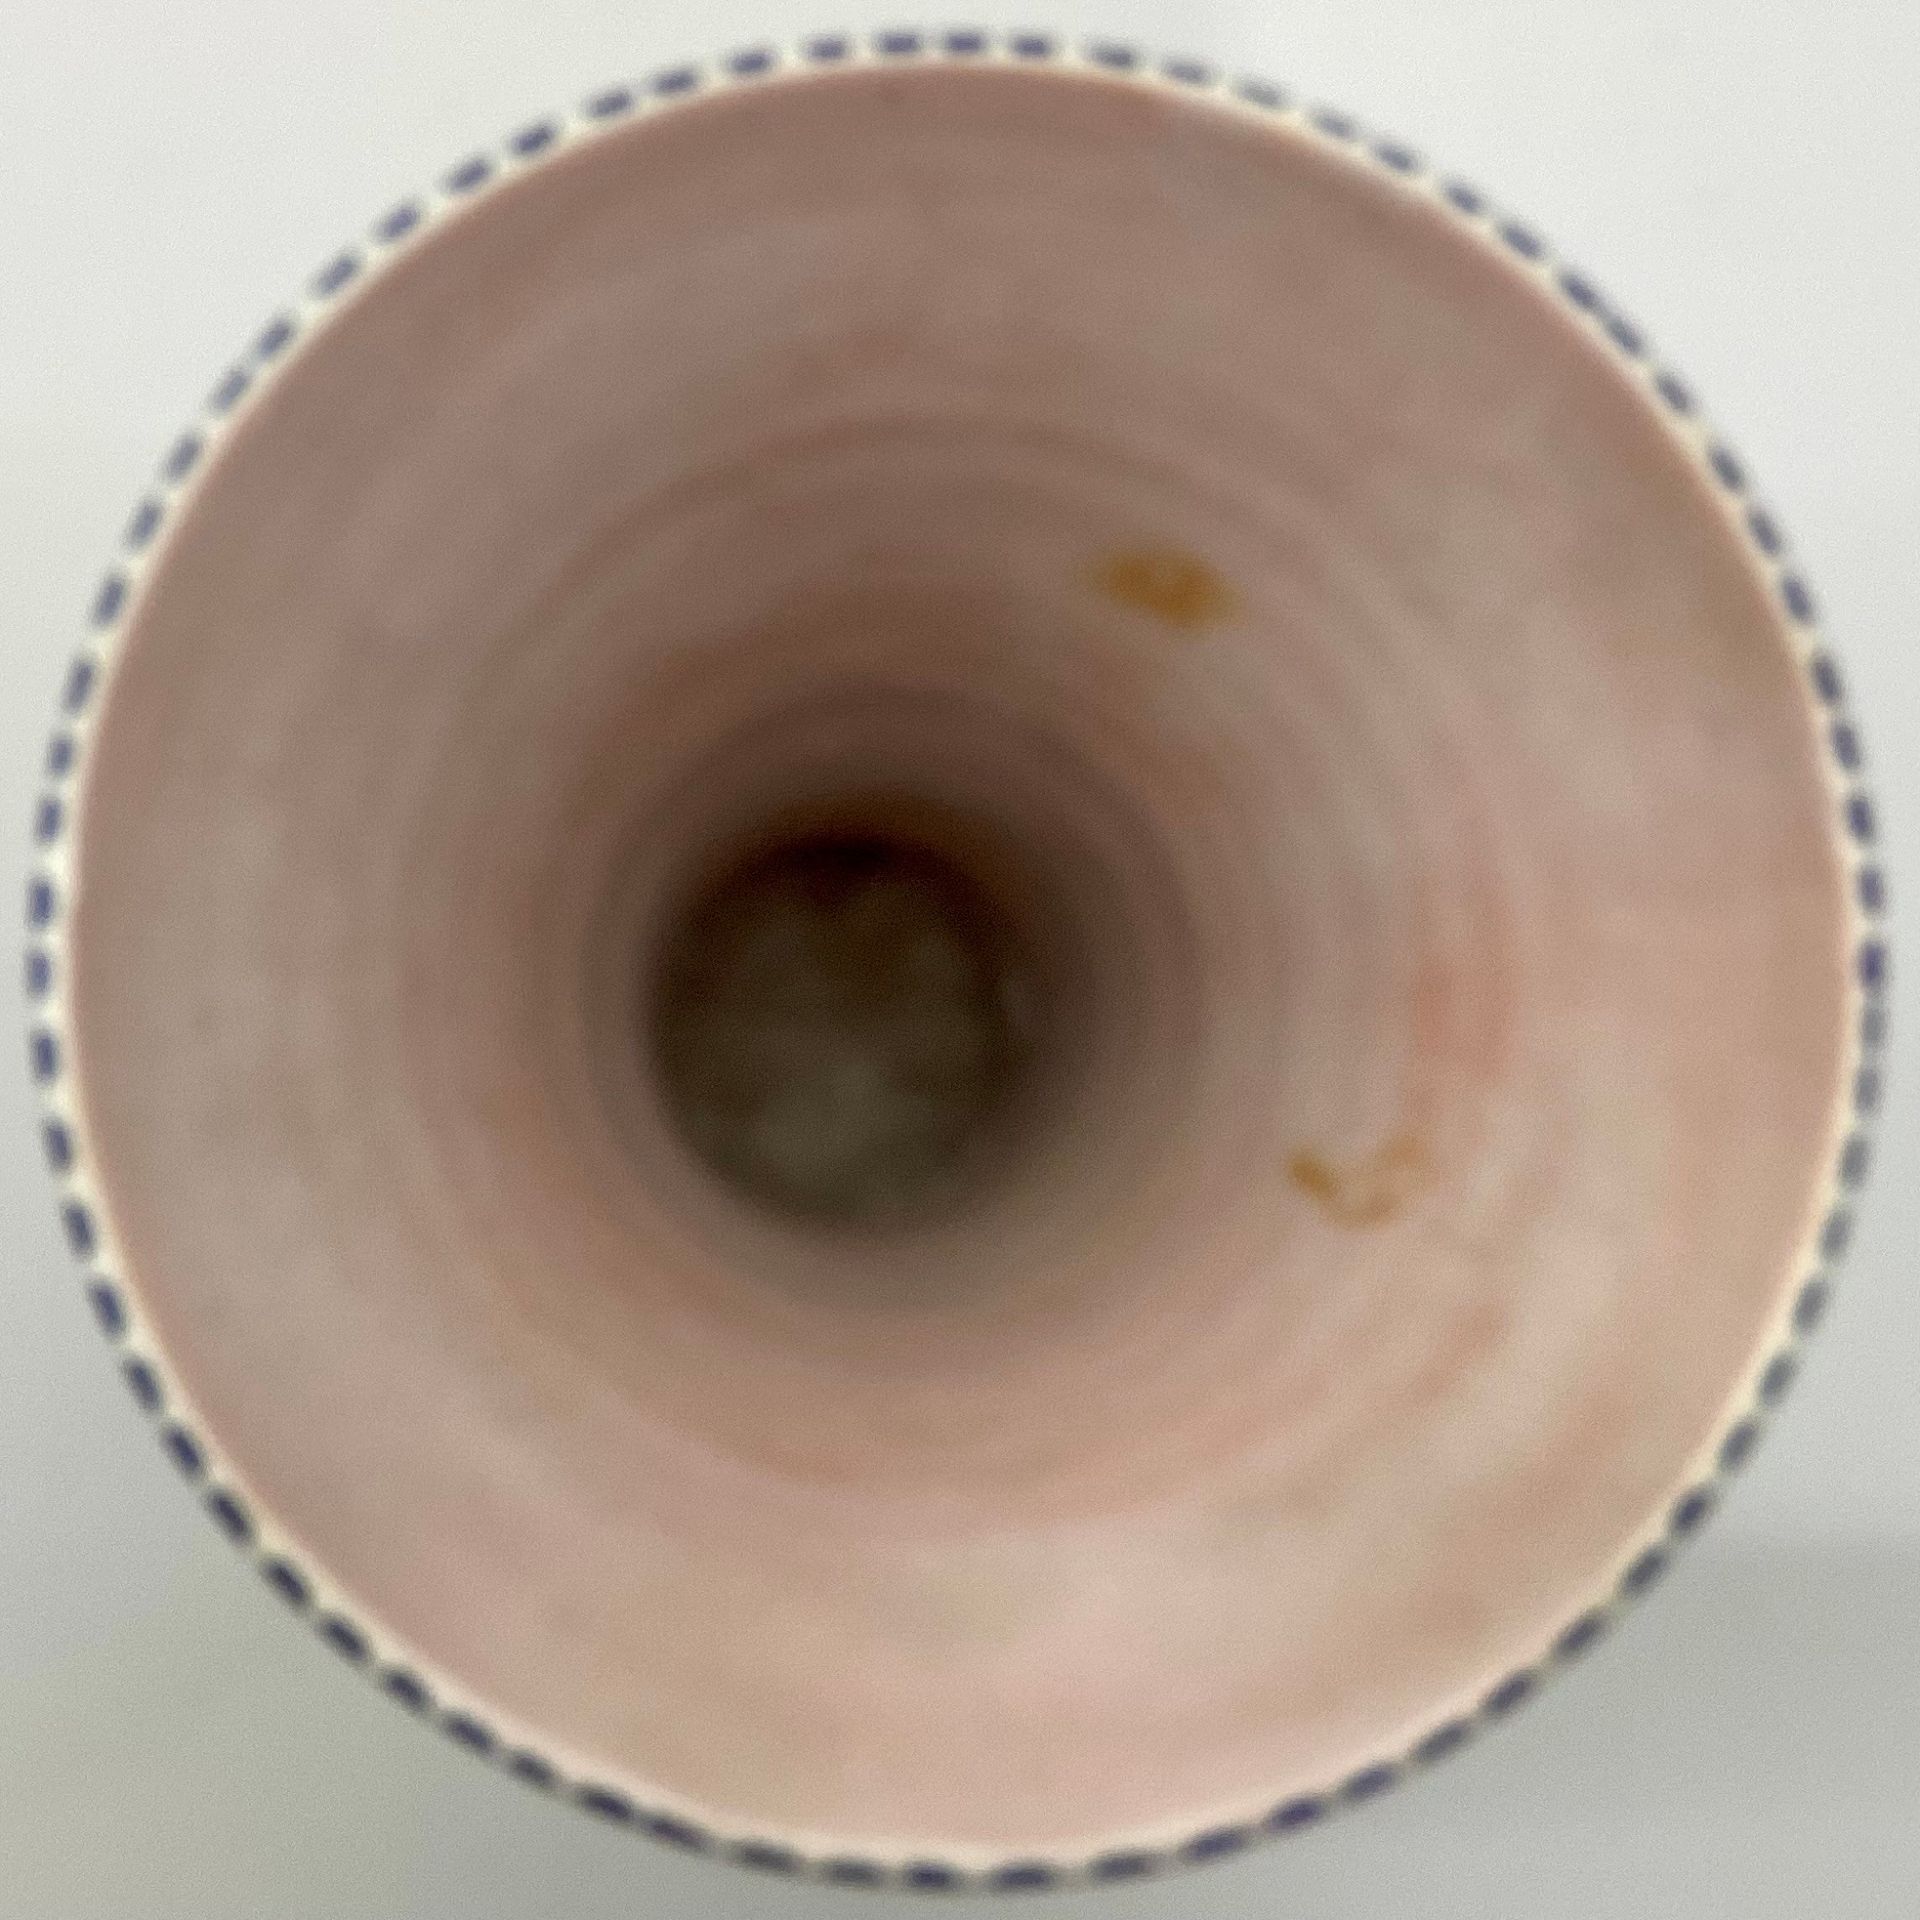 Poole Pottery shape 598 YW pattern large trumpet vase by Clarice Heath 9" high. - Image 4 of 5